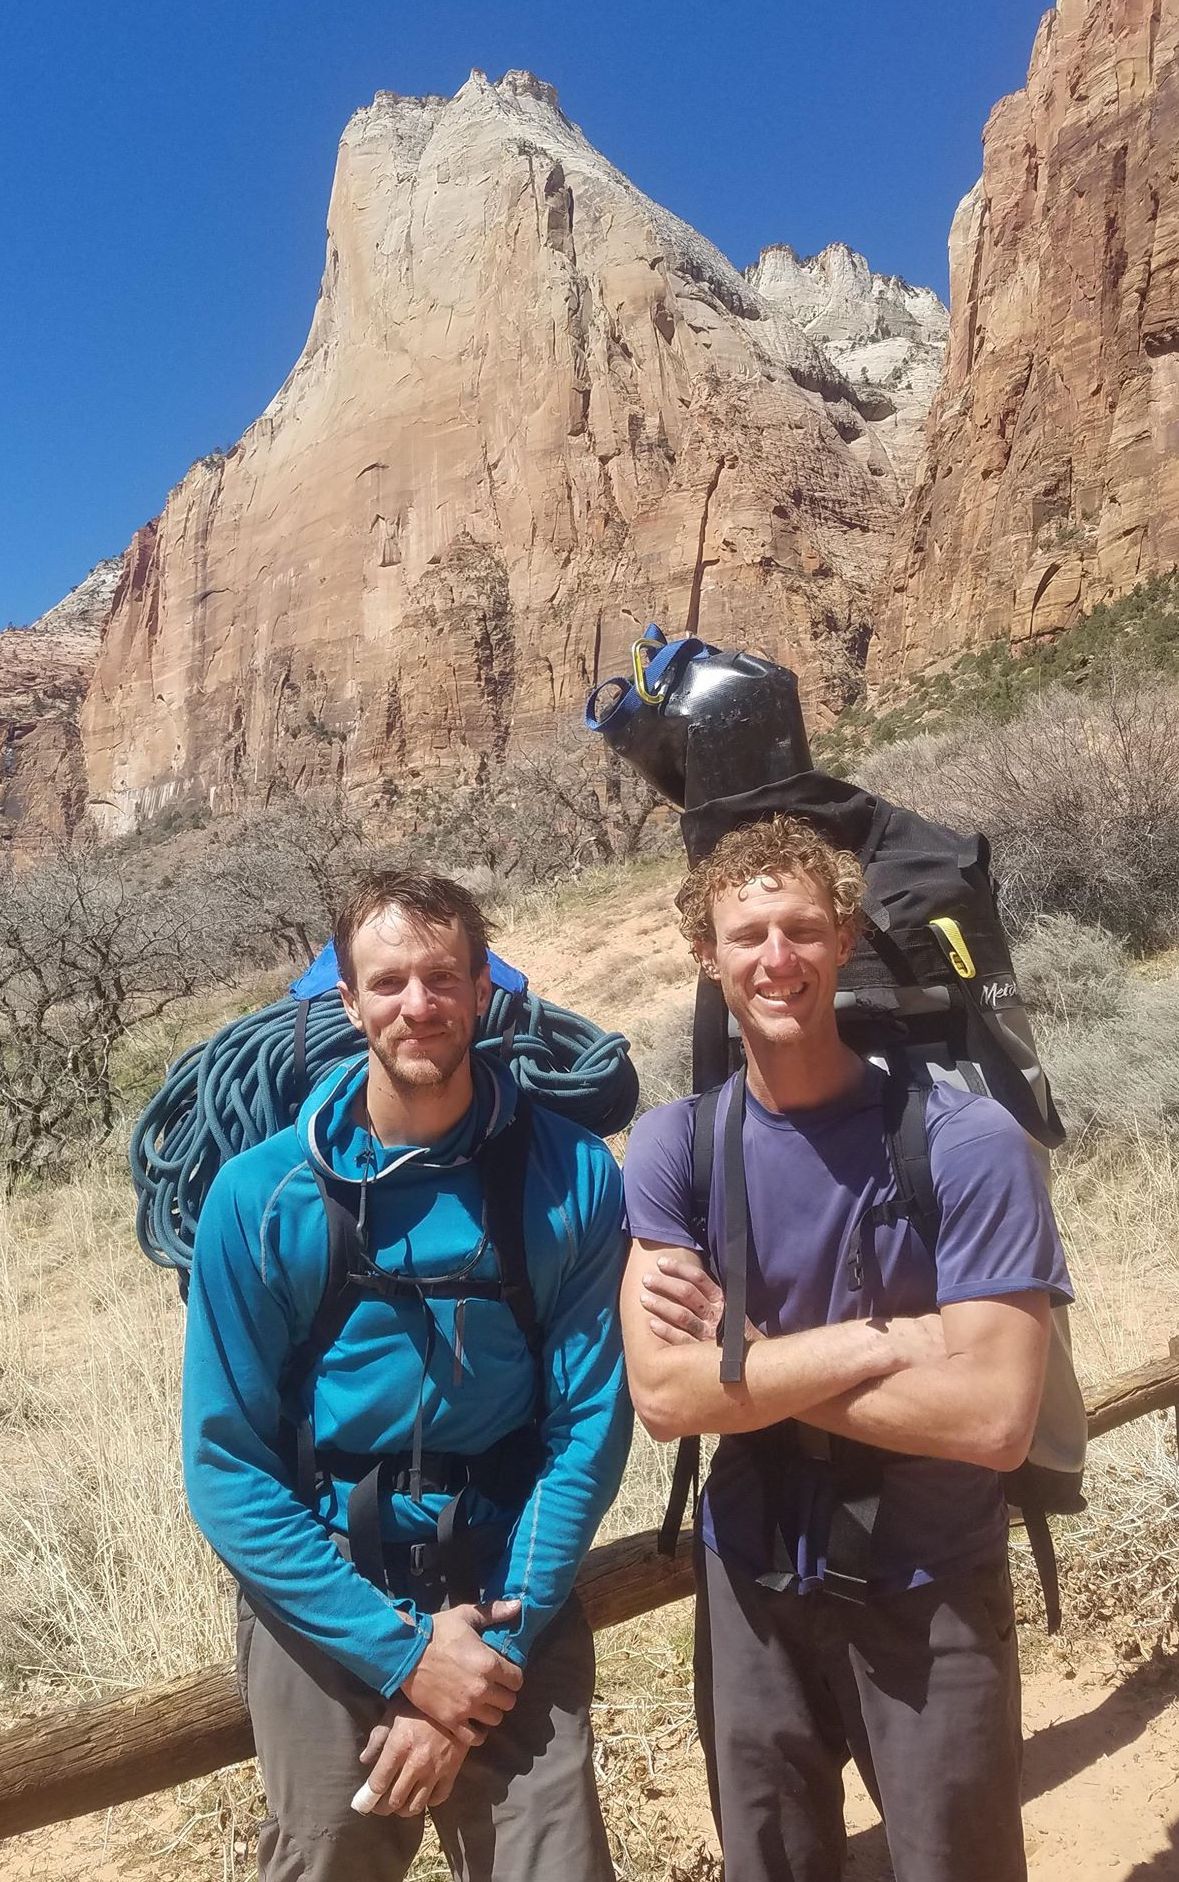 Brandon Adams, left, and Roger Putnam in Zion after the first ascent of Pangea (VI 5.10 A4) on Abraham (visible in the background), March 2018. [Photo] Roger Putnam collection